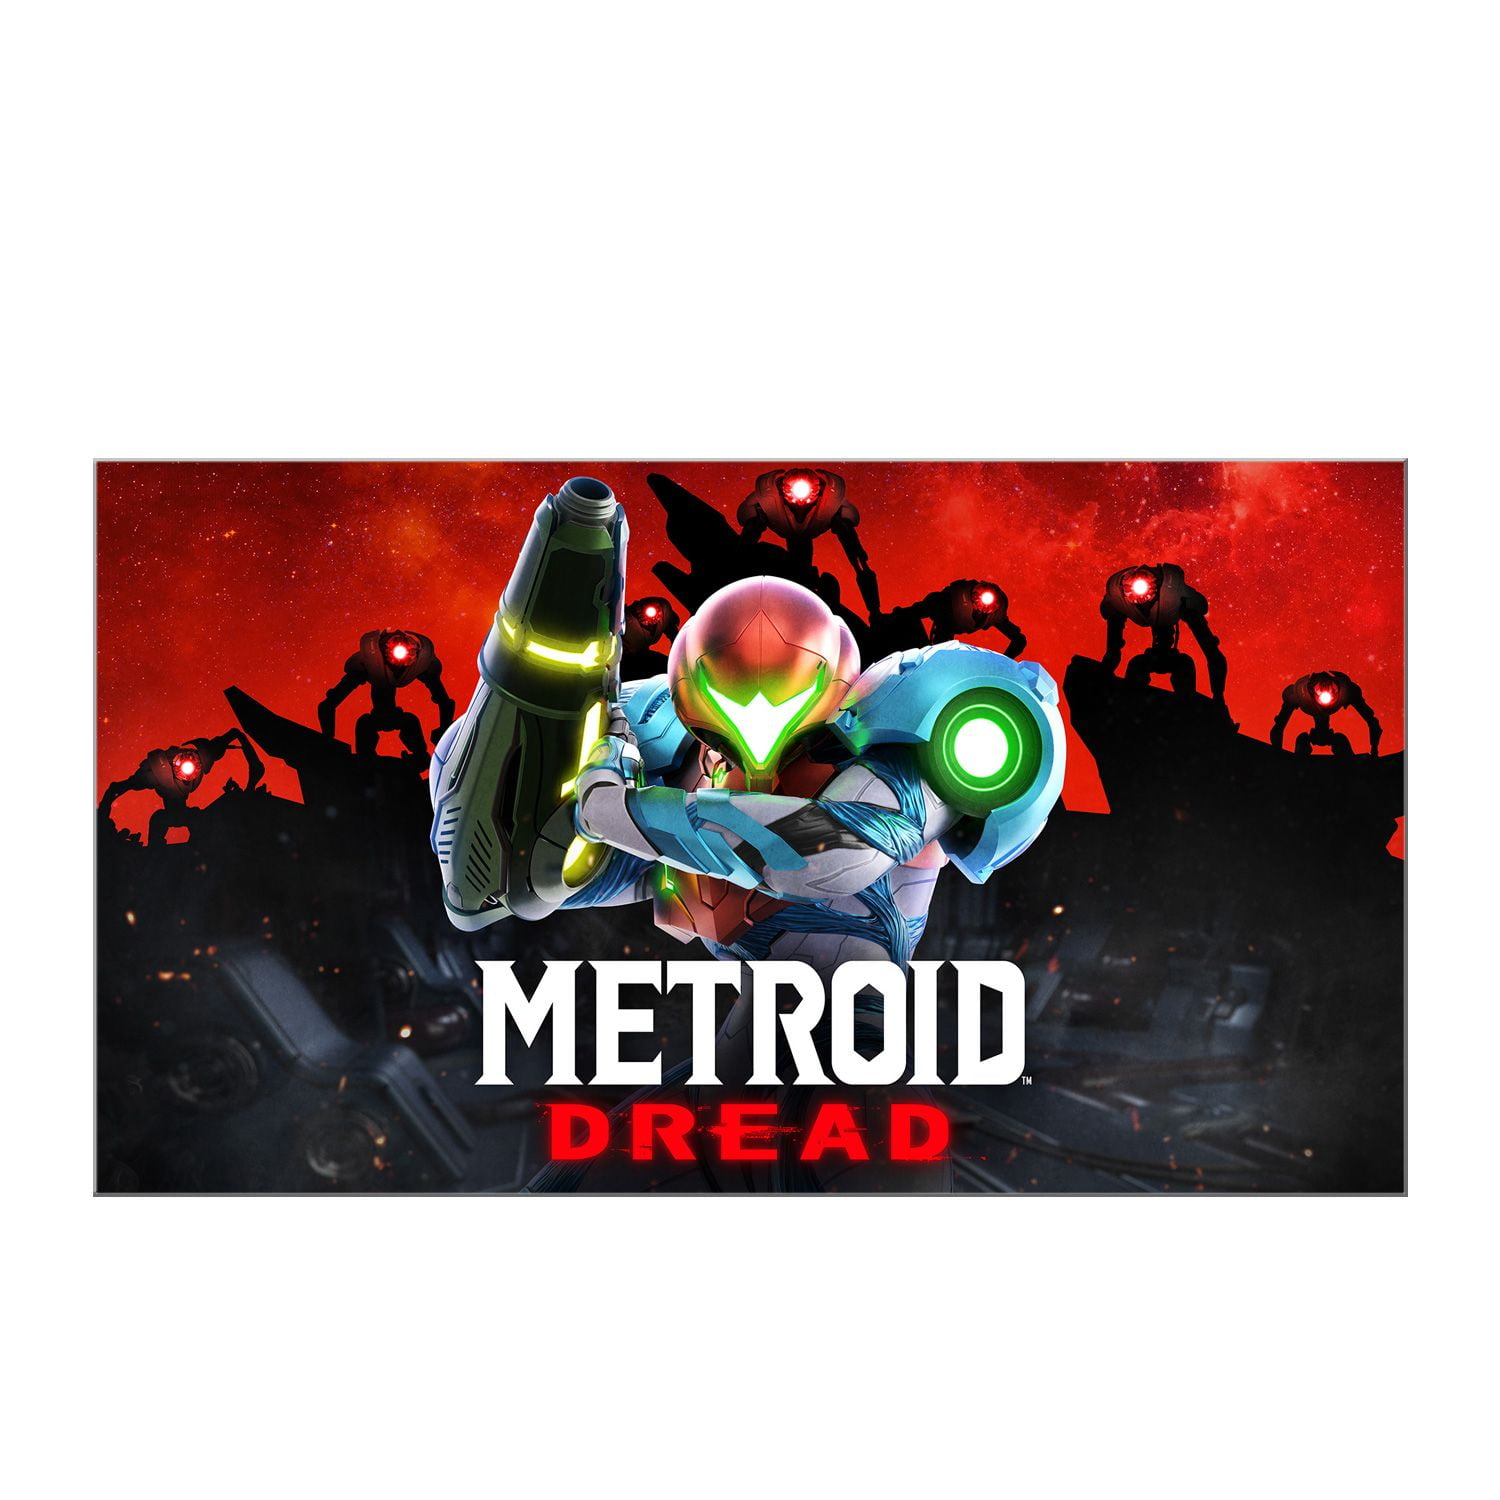 Metroid Dread' review: A great story wrapped in a hand-cramping